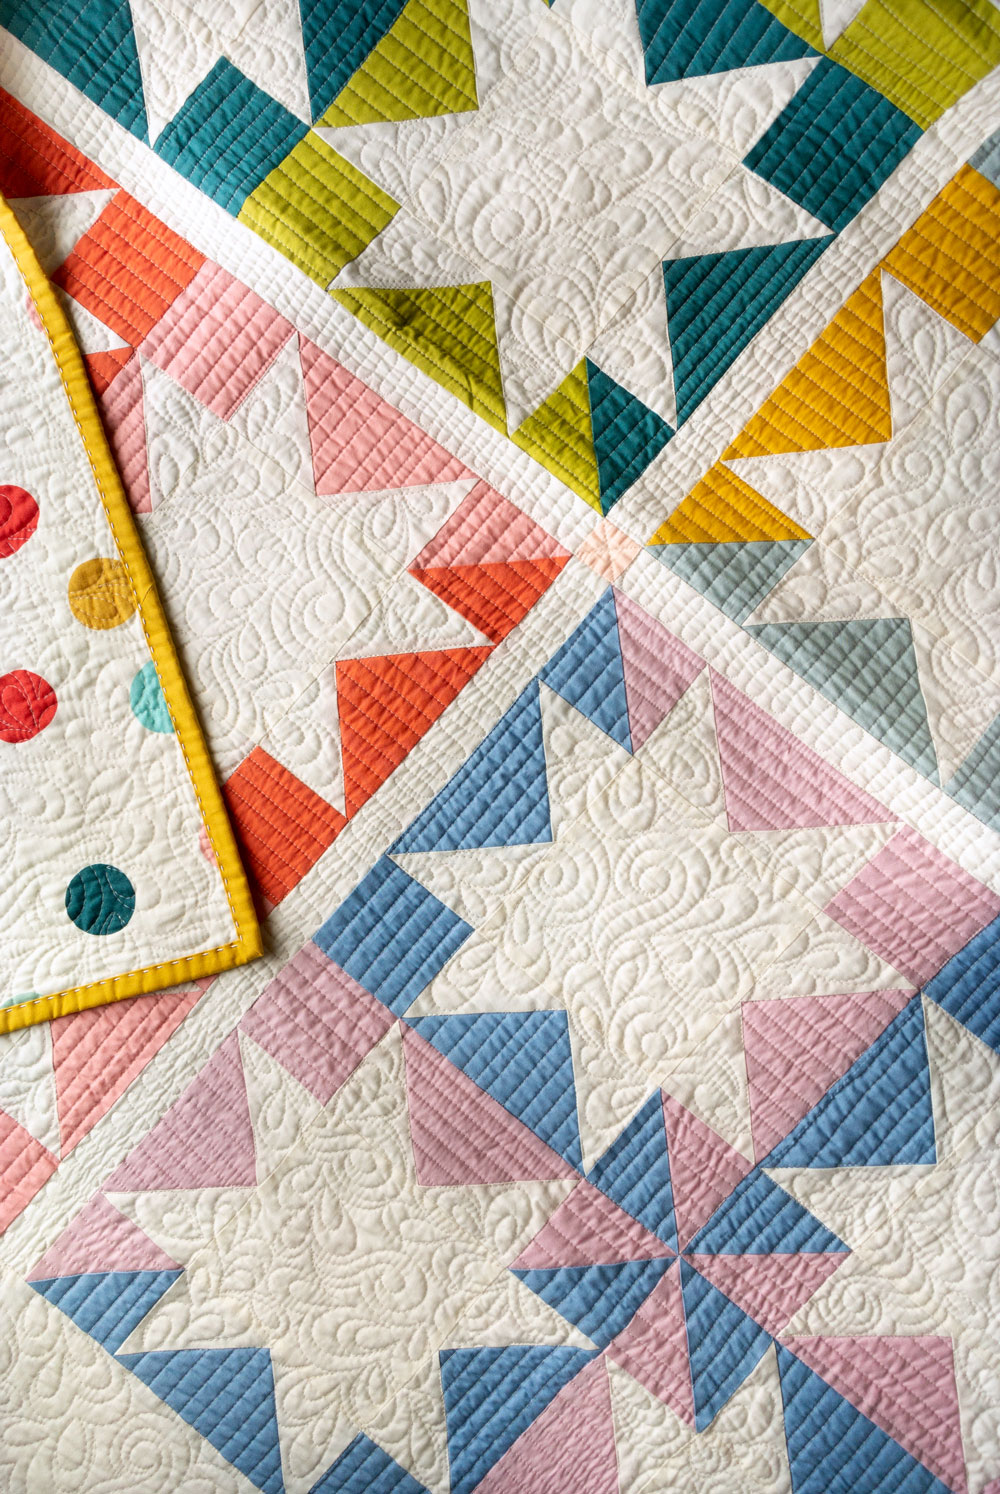 Your ultimate guide to longarm quilters in the USA and Canada. Find a quilter in your local area, or one that takes mail-in orders.